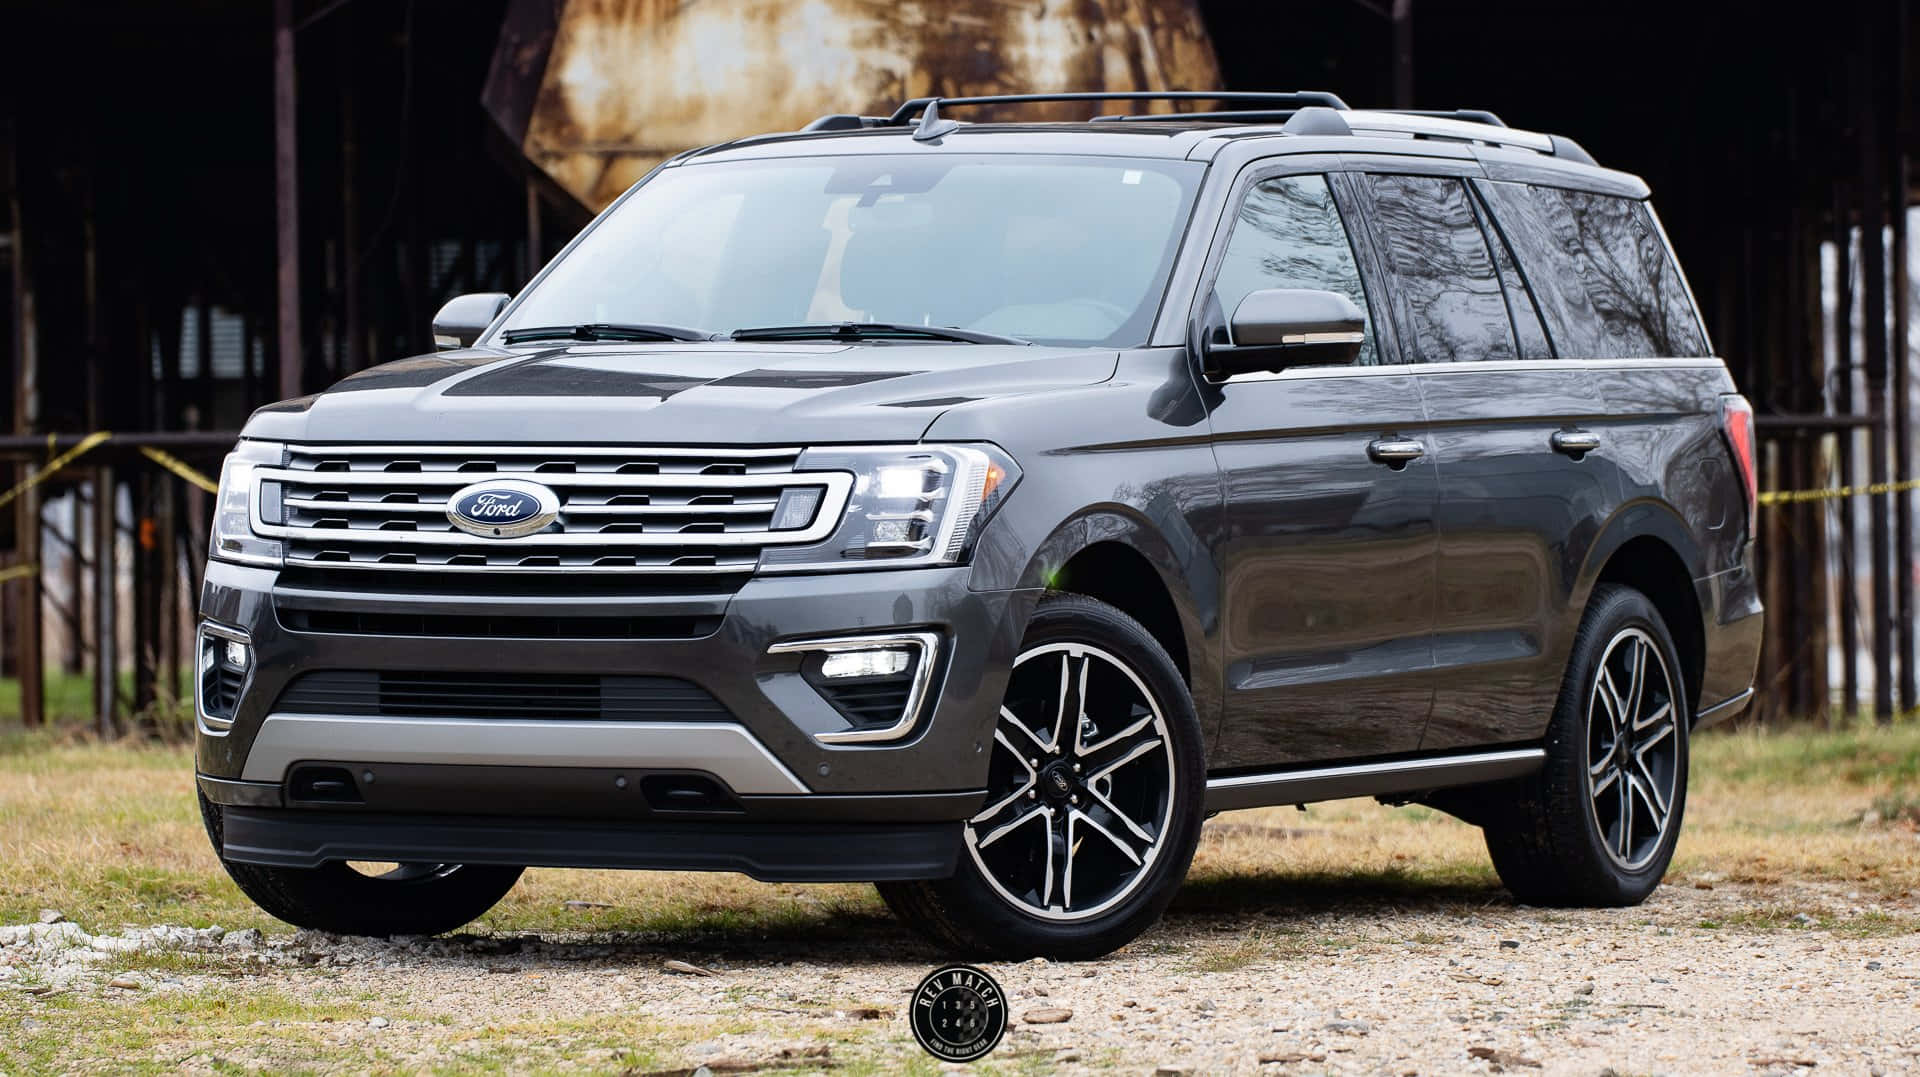 Caption: Sleek and Powerful - The Ford Expedition Wallpaper